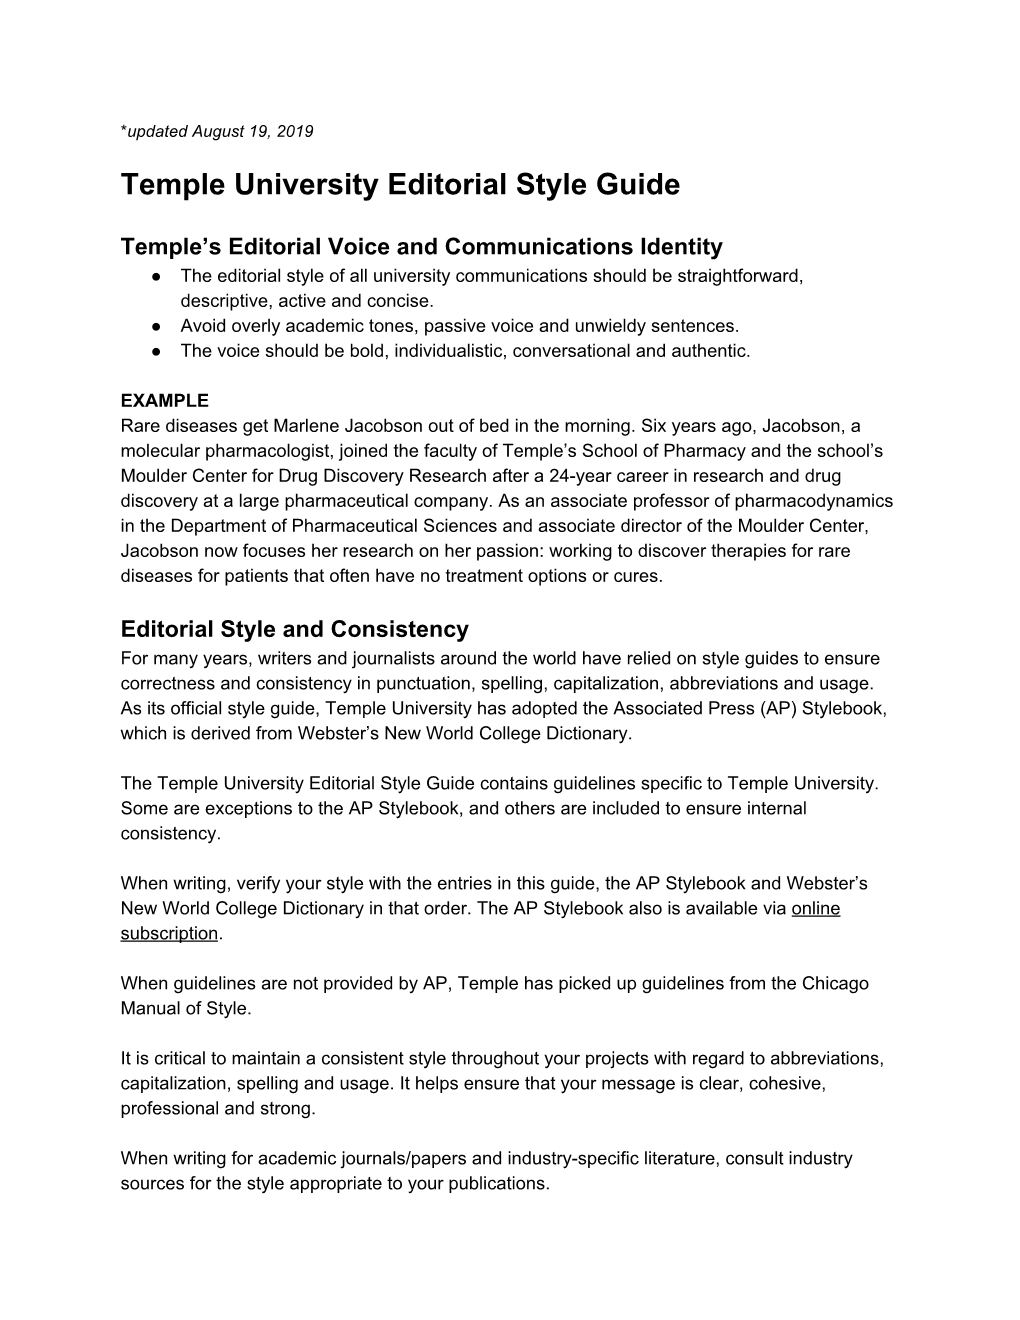 Temple University Editorial Style Guide